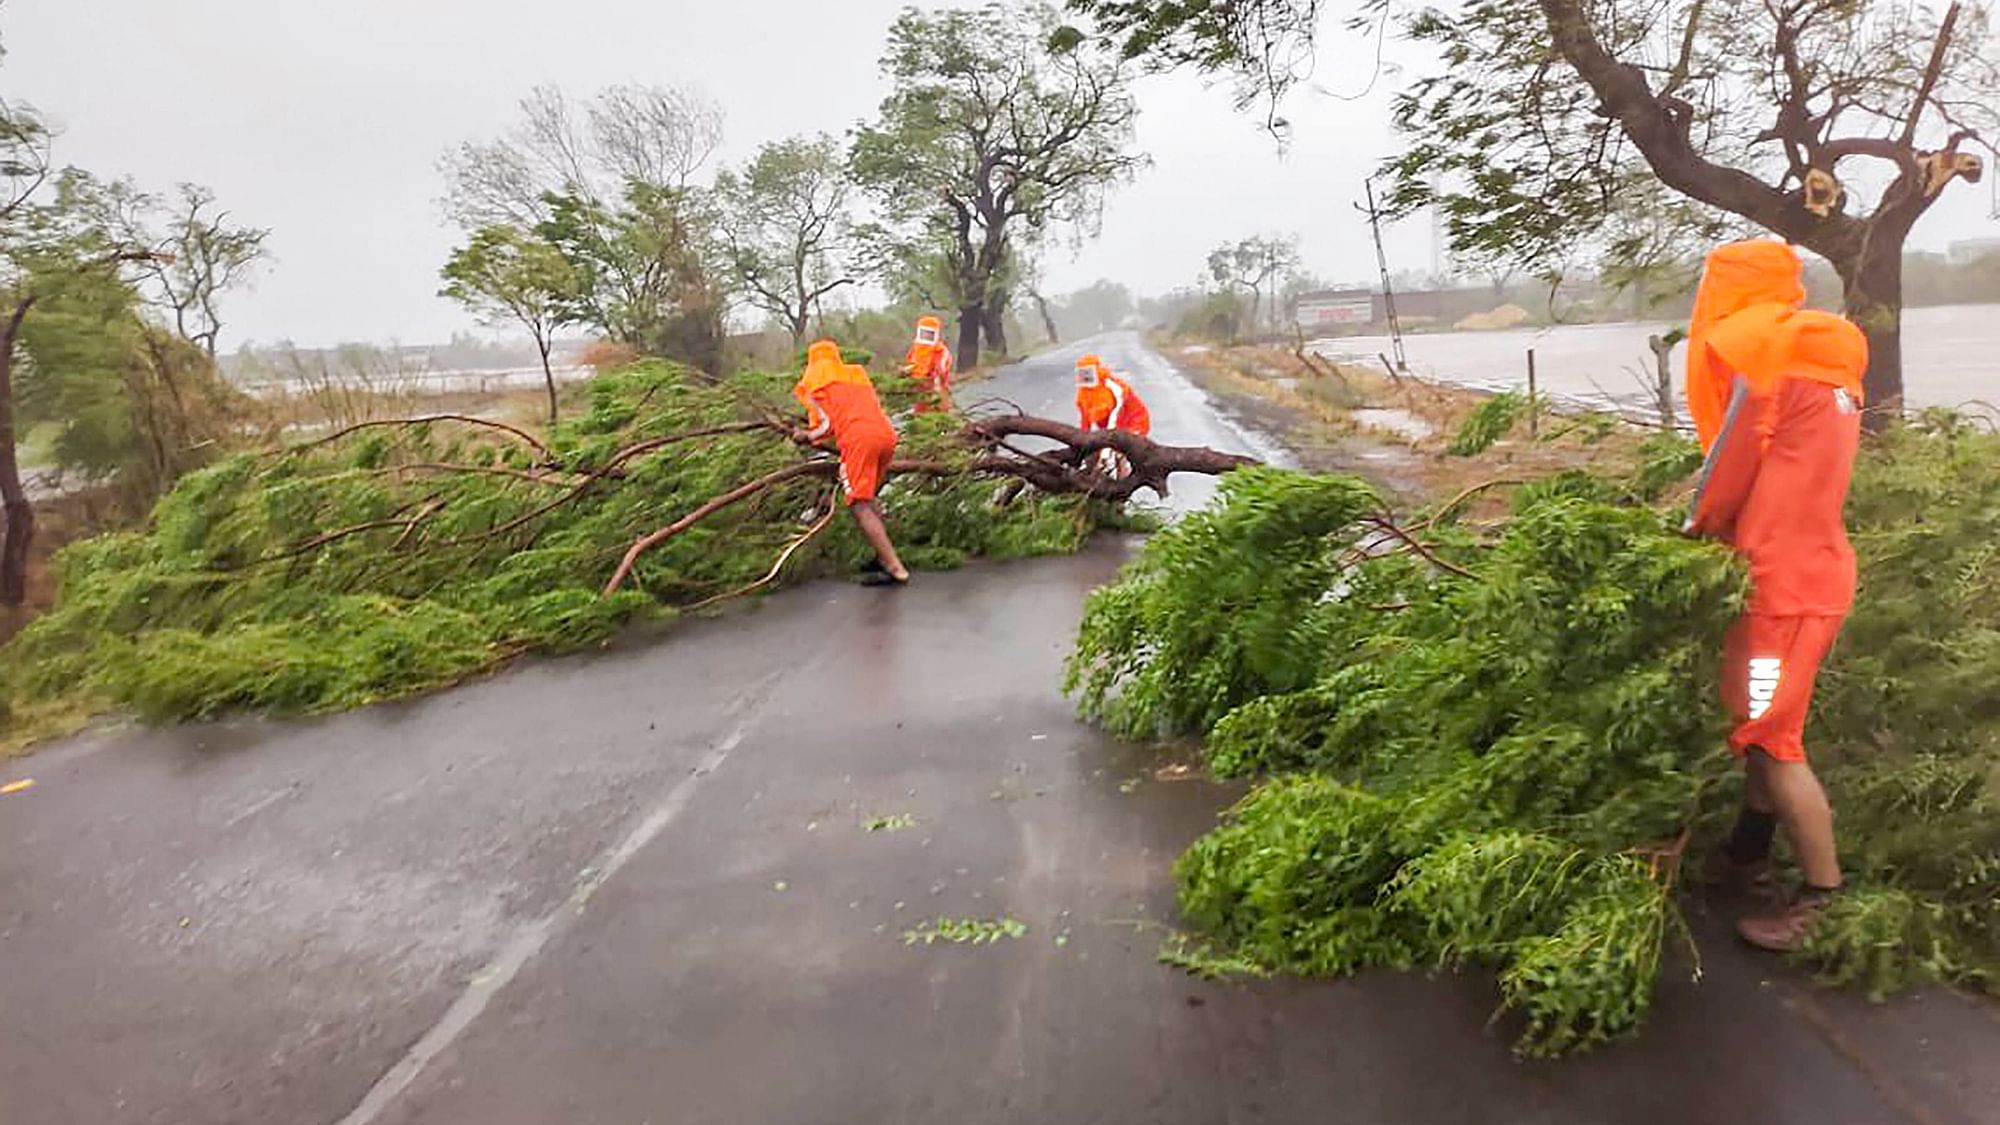  NDRF personnel clear a fallen tree from a road during restoration works following the landfall of Cyclone Tauktae, in Valsad, Gujarat.